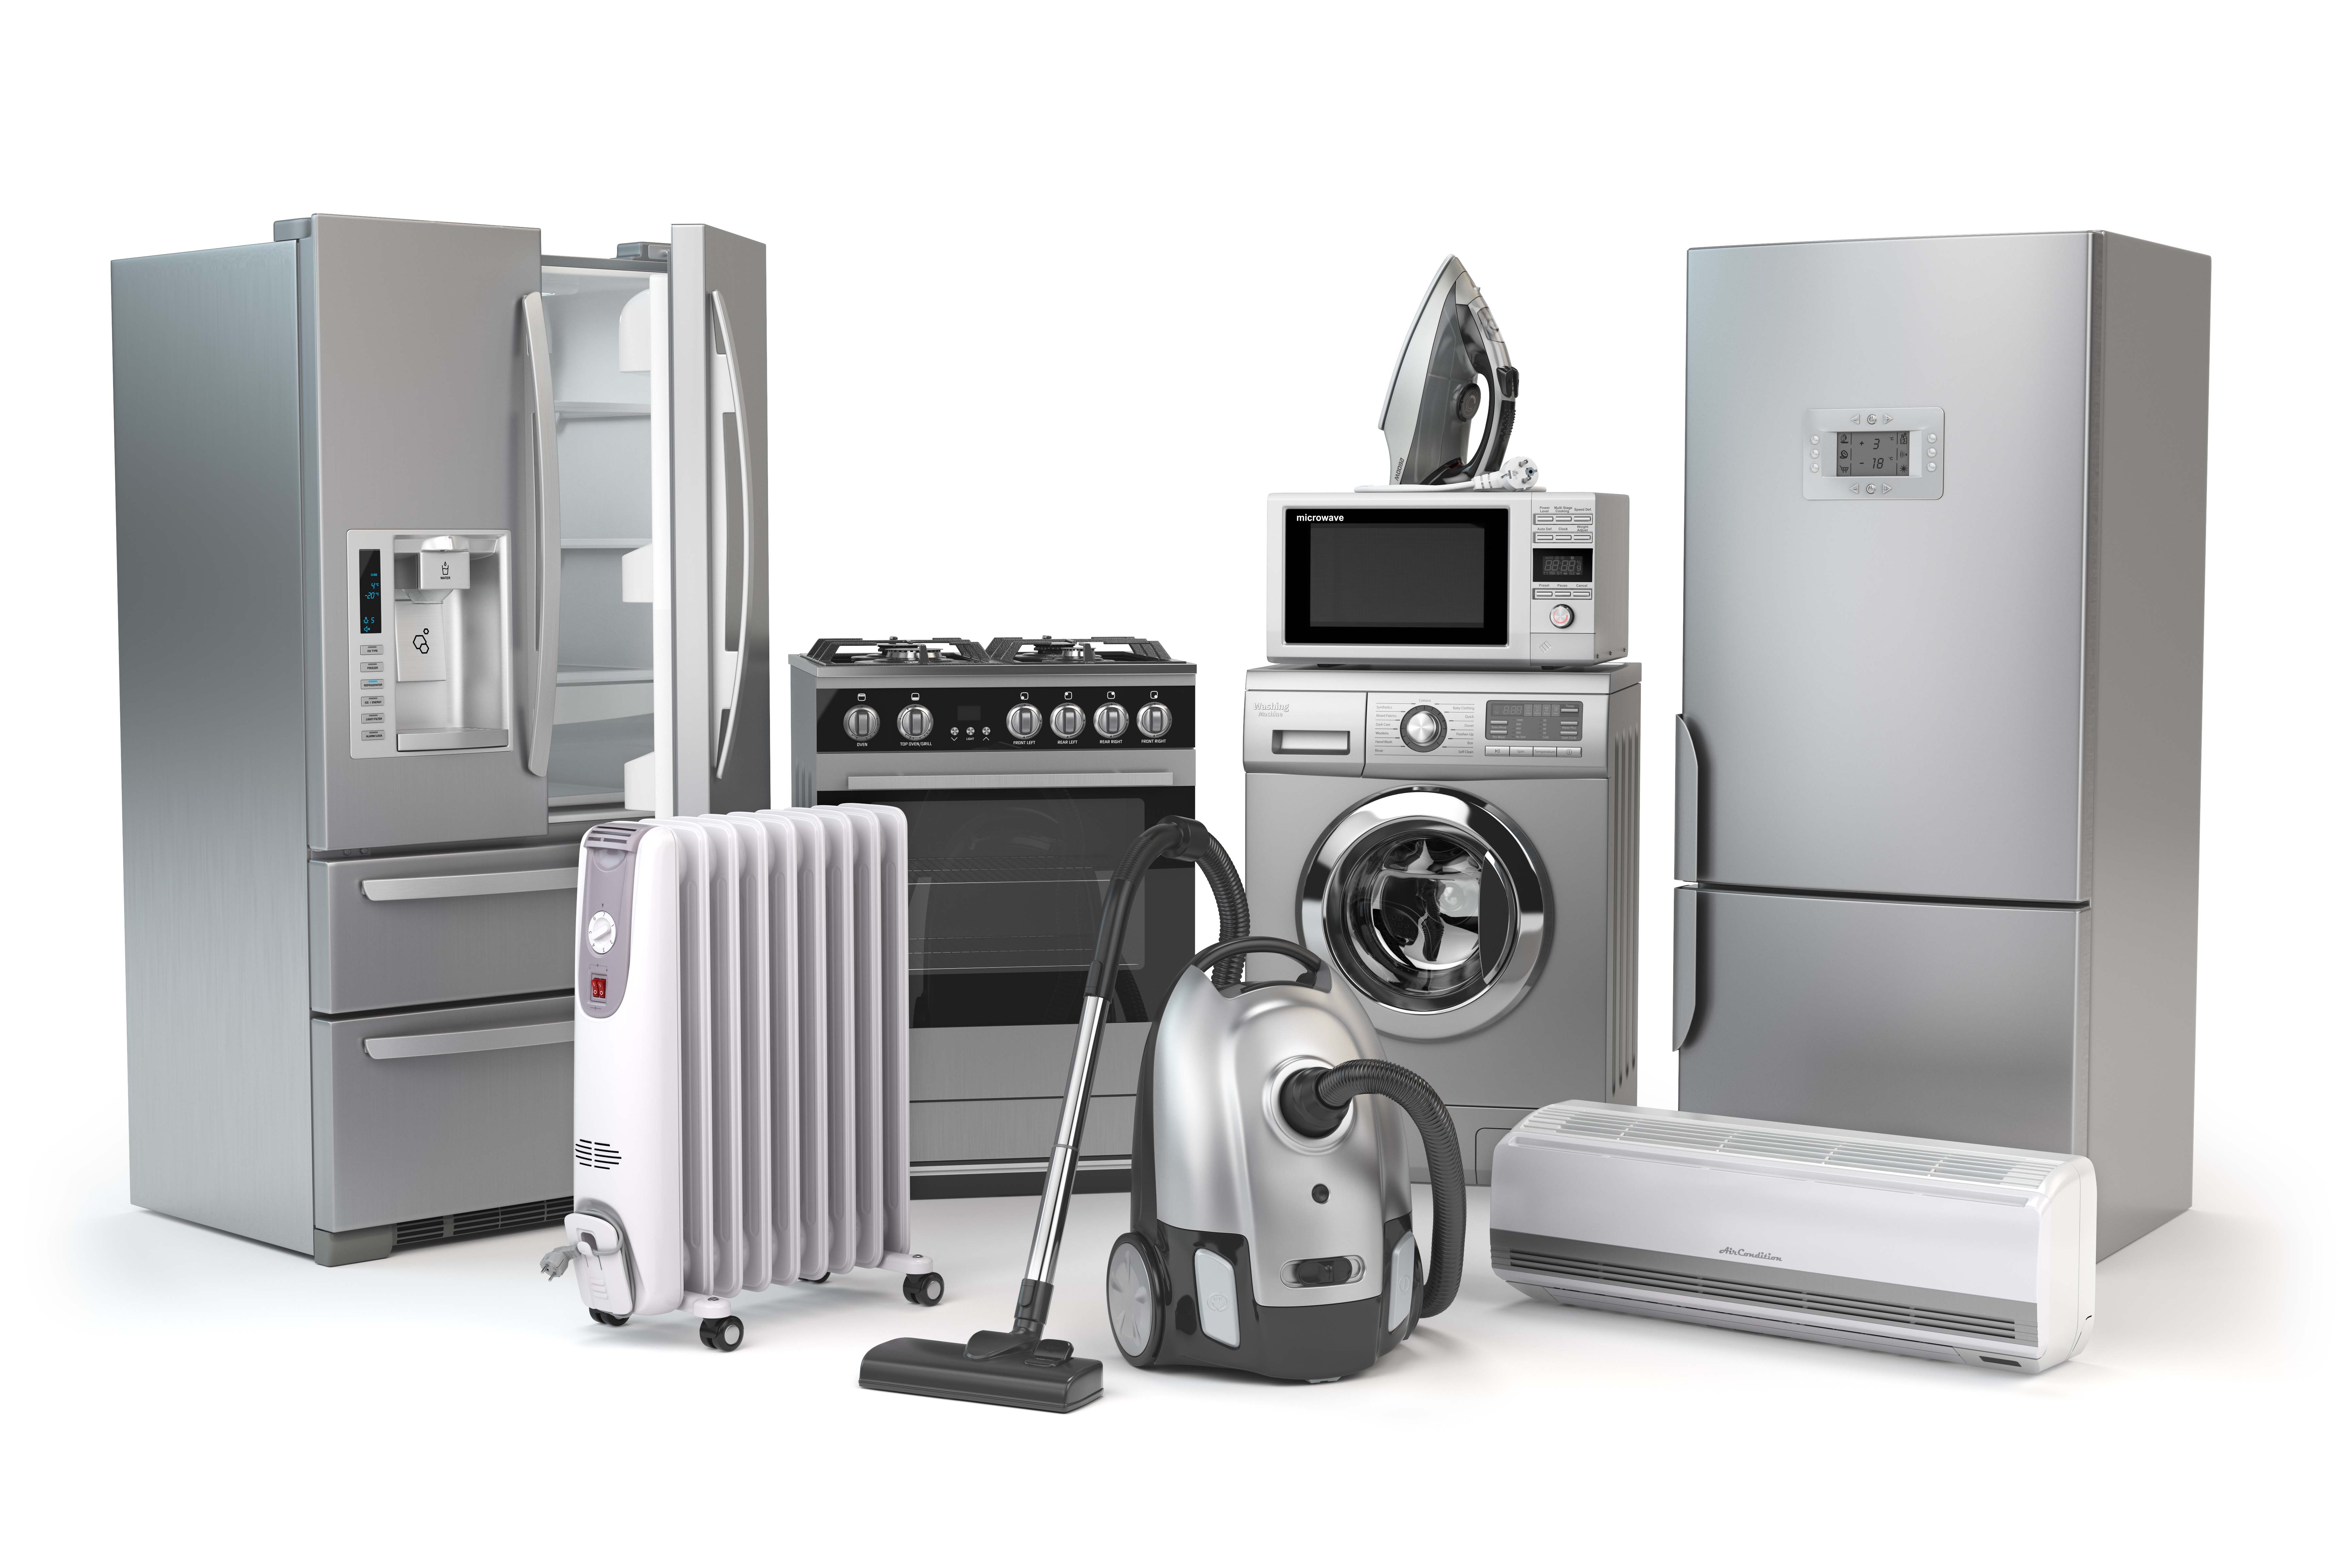 household-appliances-testing-and-evaluation-application-konica